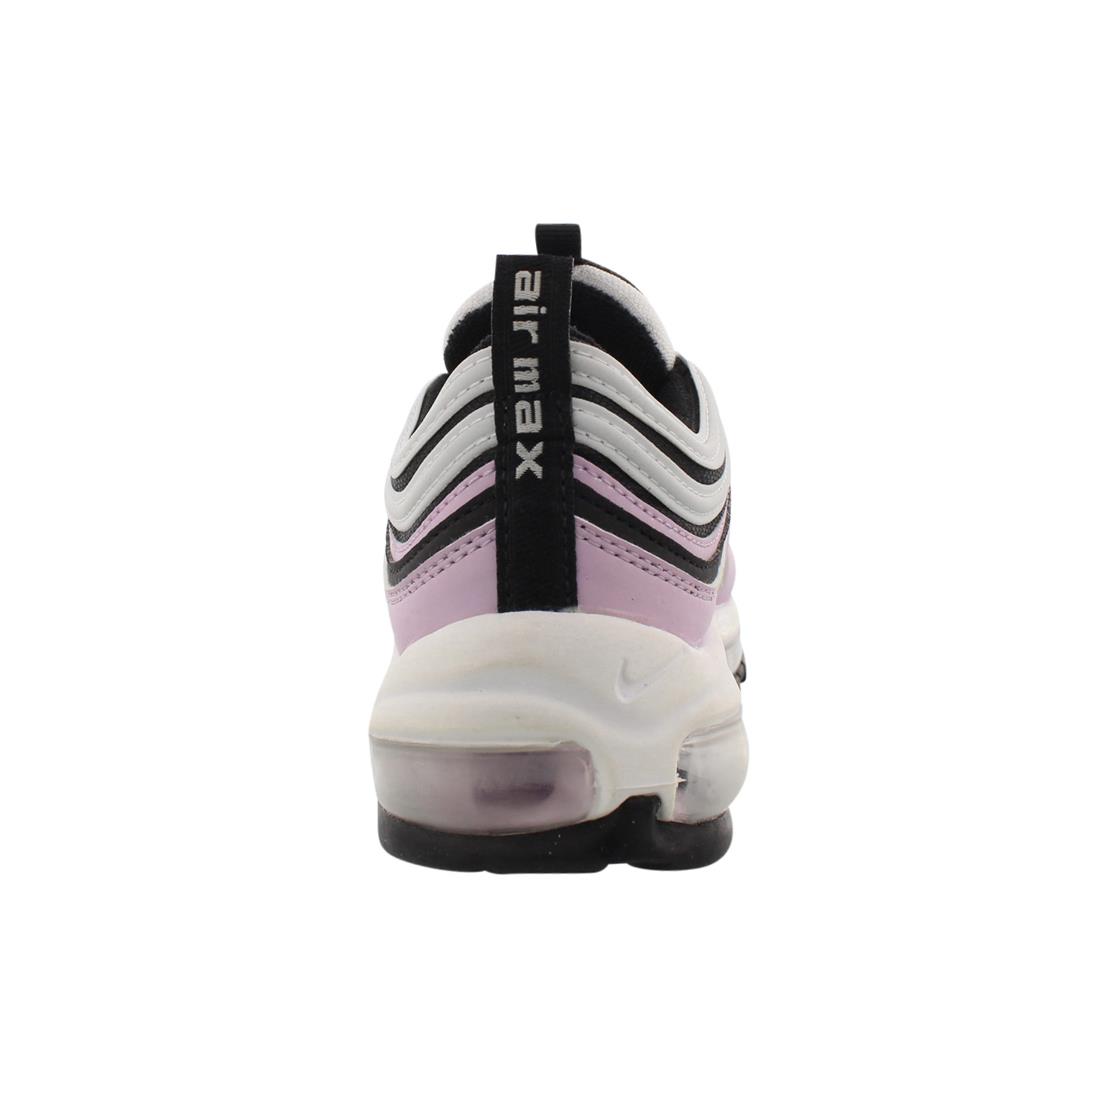 Nike shoes  - Iced Lilac/Black/Photon Dust, Main: Pink 6